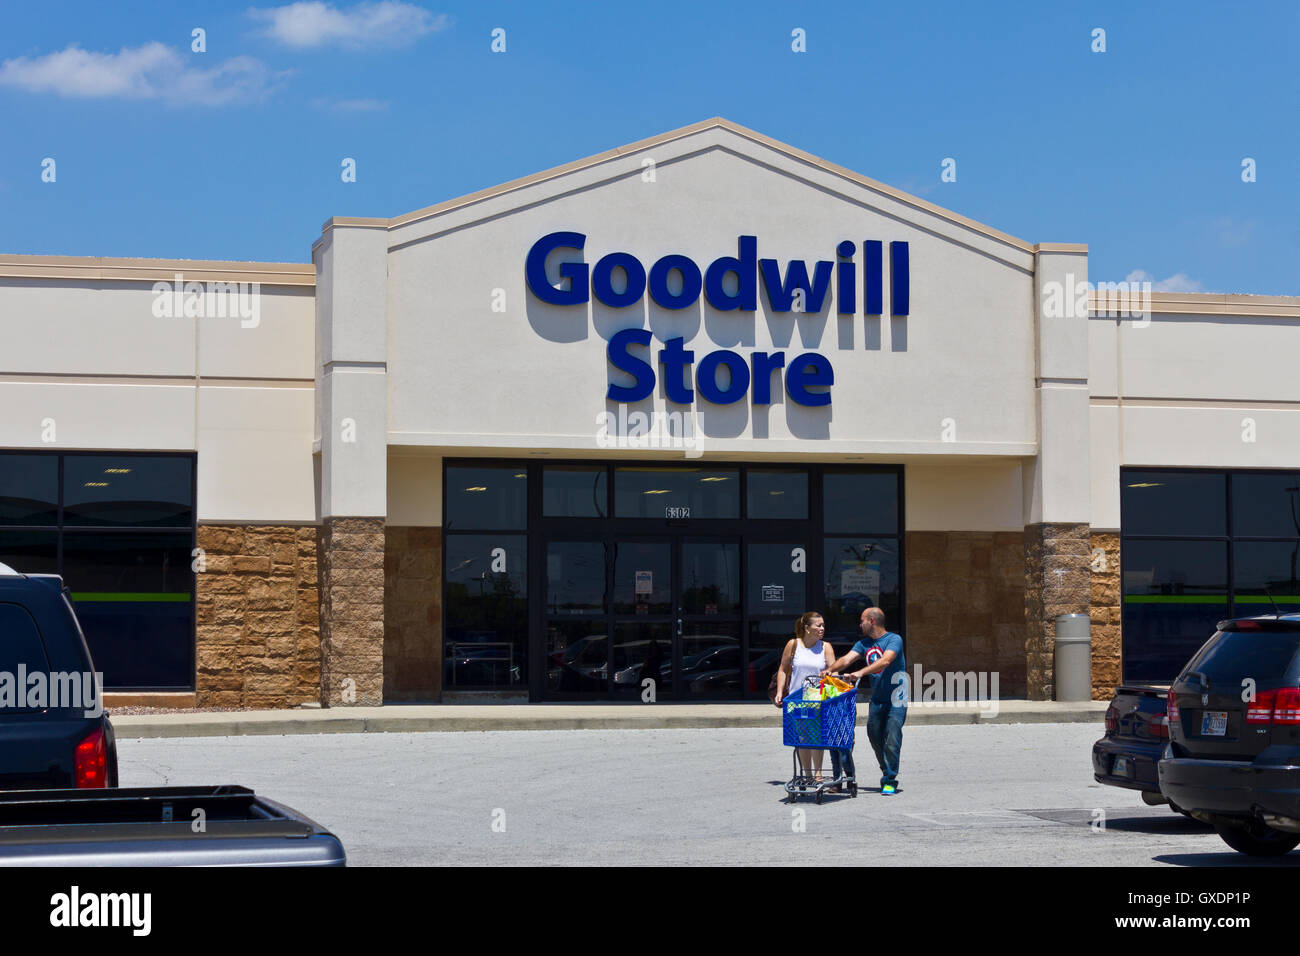 Indianapolis - Circa June 2016: A Goodwill Store. In 2015, Goodwill helped more than 26.4 million people train for careers II Stock Photo